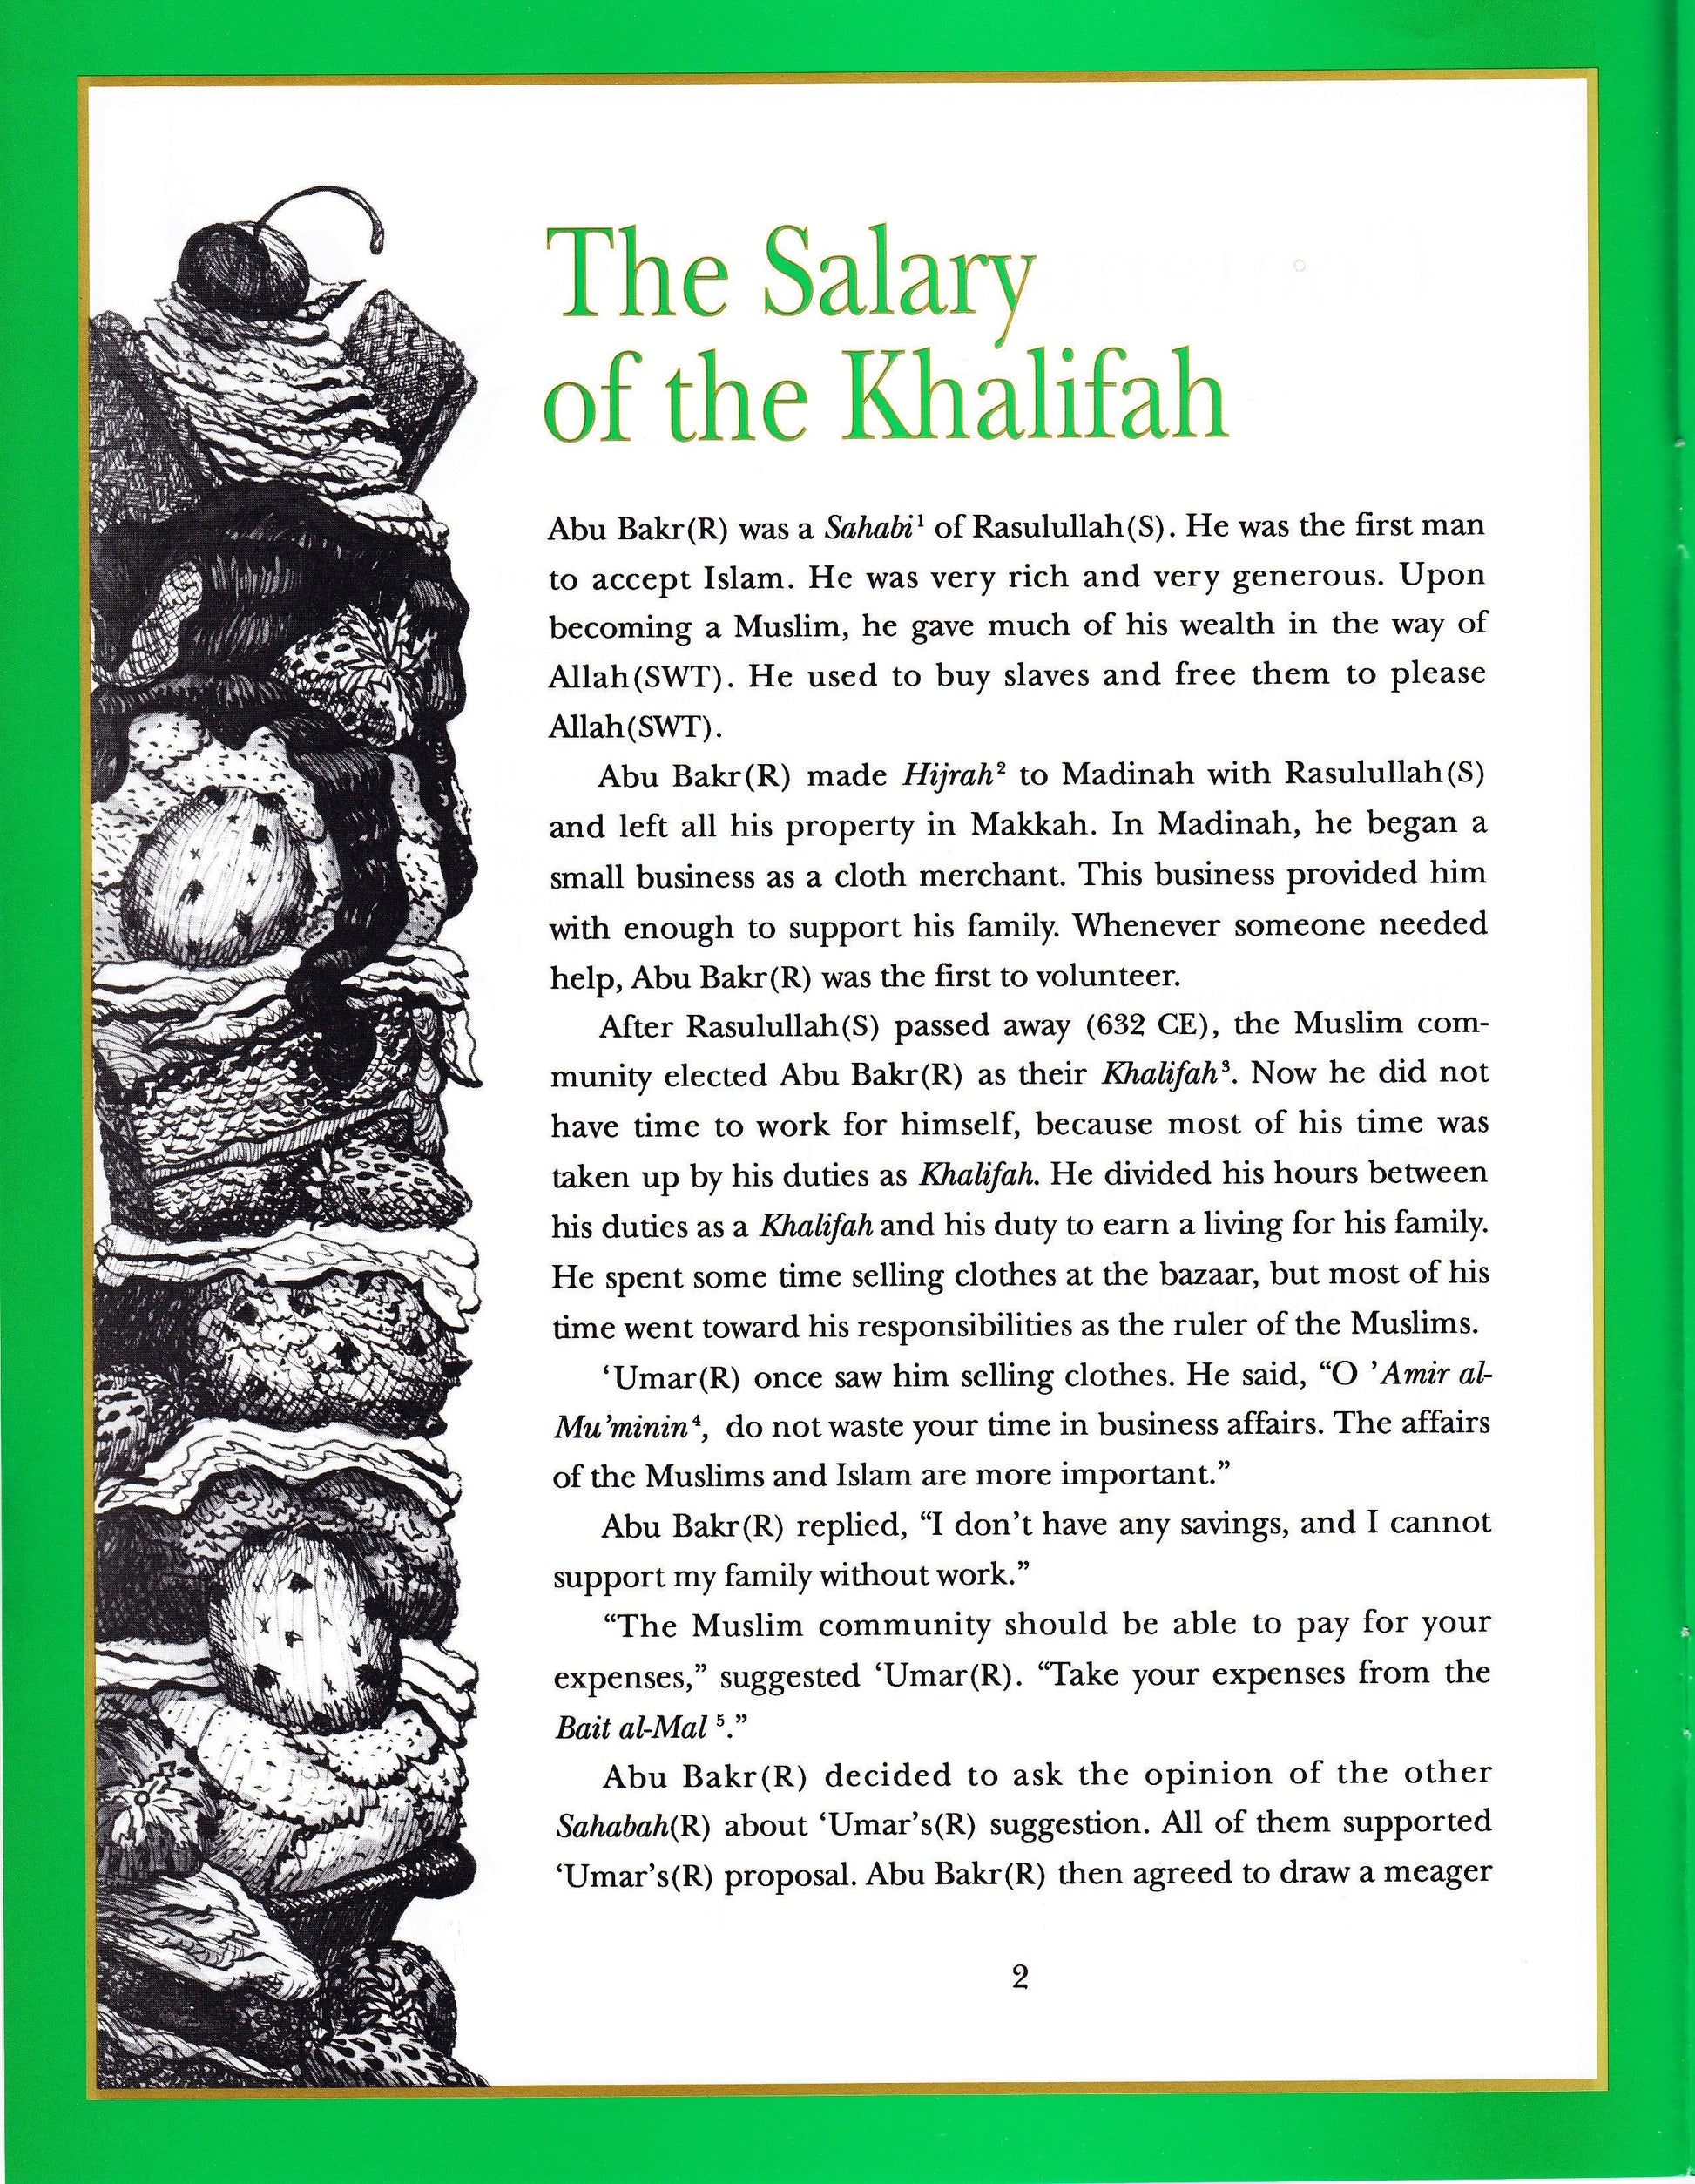 Salary of the Khalifah - Premium Textbook from IQRA' international Educational Foundation - Just $3! Shop now at IQRA Book Center | A Division of IQRA' international Educational Foundation